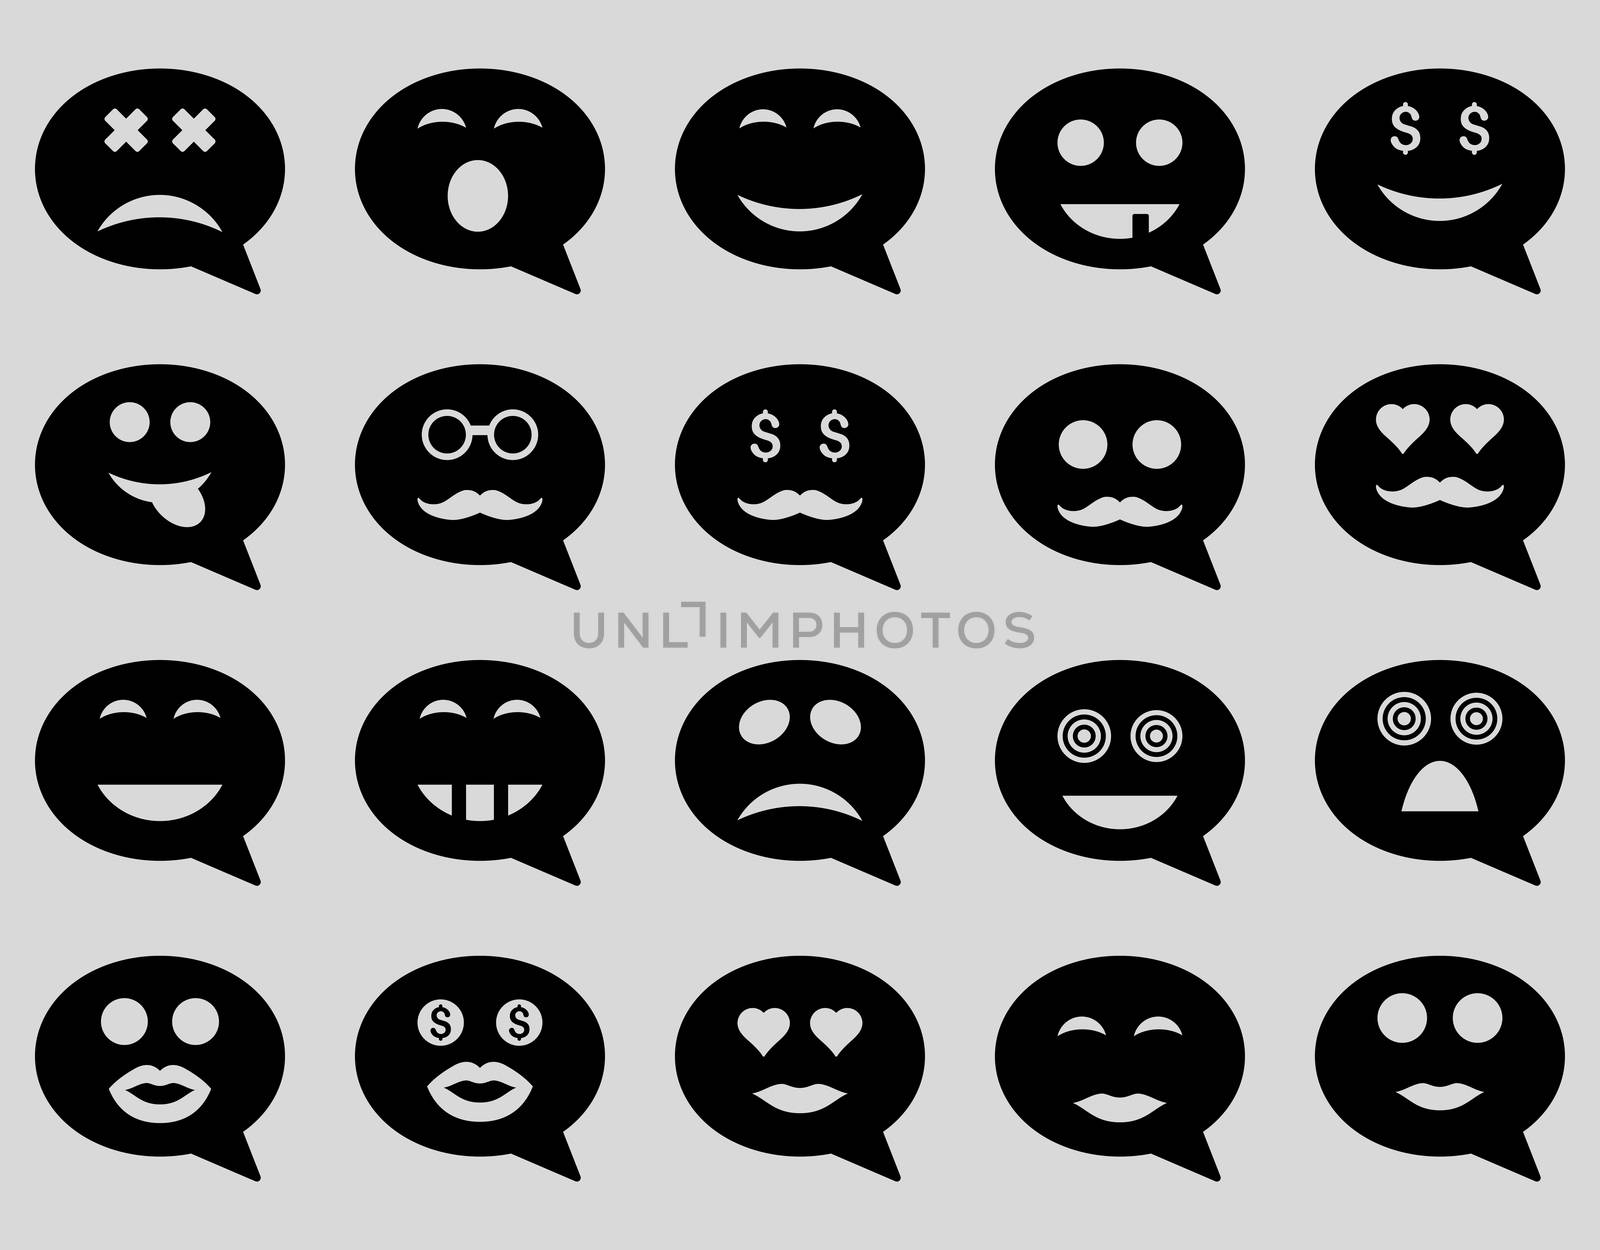 Chat emotion smile icons. Glyph set style is flat images, black symbols, isolated on a light gray background.